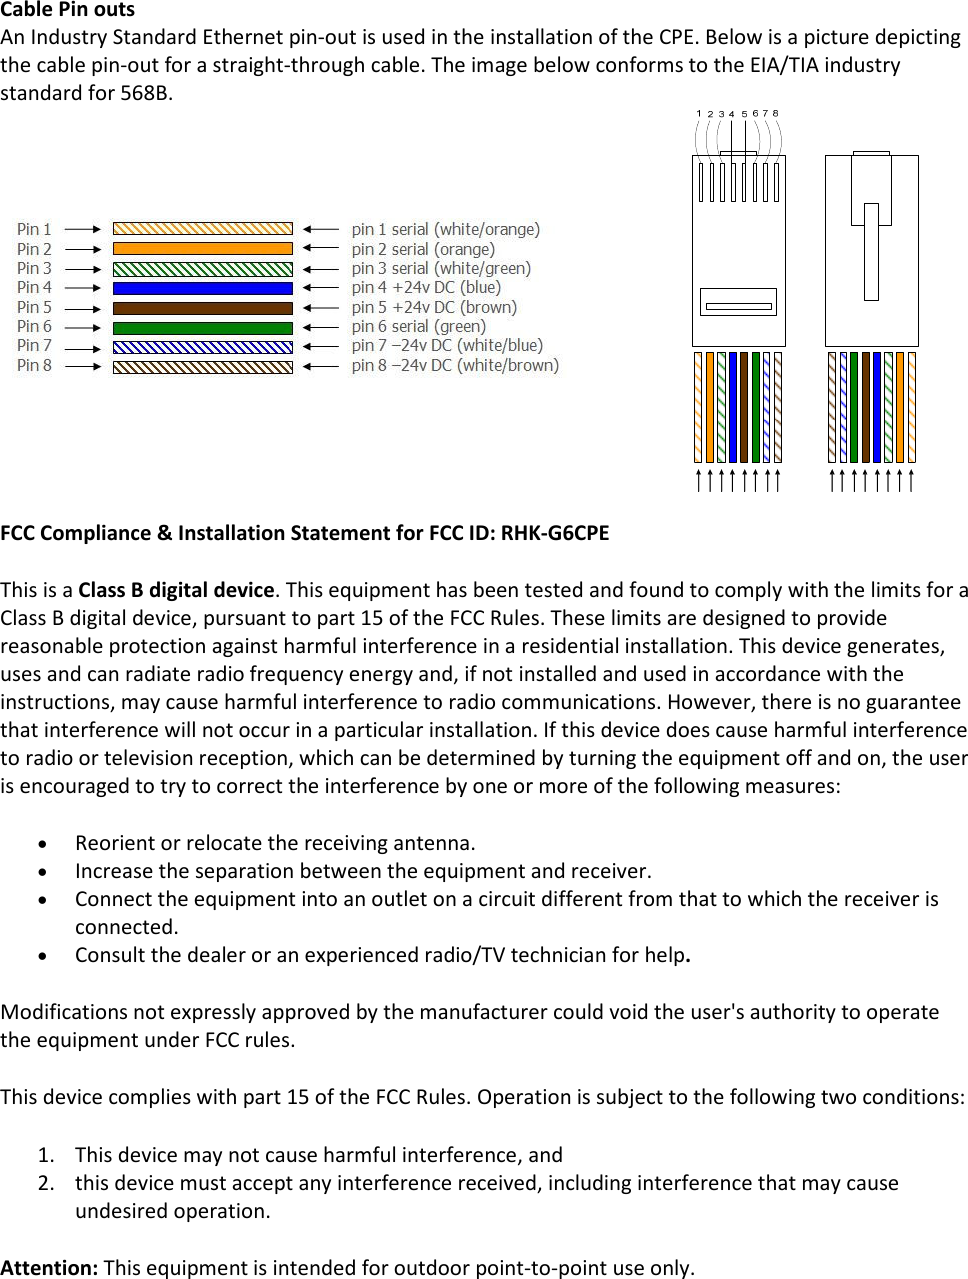 Cable Pin outs An Industry Standard Ethernet pin-out is used in the installation of the CPE. Below is a picture depicting the cable pin-out for a straight-through cable. The image below conforms to the EIA/TIA industry standard for 568B.                        FCC Compliance &amp; Installation Statement for FCC ID: RHK-G6CPE This is a Class B digital device. This equipment has been tested and found to comply with the limits for a Class B digital device, pursuant to part 15 of the FCC Rules. These limits are designed to provide reasonable protection against harmful interference in a residential installation. This device generates, uses and can radiate radio frequency energy and, if not installed and used in accordance with the instructions, may cause harmful interference to radio communications. However, there is no guarantee that interference will not occur in a particular installation. If this device does cause harmful interference to radio or television reception, which can be determined by turning the equipment off and on, the user is encouraged to try to correct the interference by one or more of the following measures: • Reorient or relocate the receiving antenna. • Increase the separation between the equipment and receiver. • Connect the equipment into an outlet on a circuit different from that to which the receiver is connected. • Consult the dealer or an experienced radio/TV technician for help. Modifications not expressly approved by the manufacturer could void the user&apos;s authority to operate the equipment under FCC rules. This device complies with part 15 of the FCC Rules. Operation is subject to the following two conditions: 1. This device may not cause harmful interference, and 2. this device must accept any interference received, including interference that may cause undesired operation. Attention: This equipment is intended for outdoor point-to-point use only.          